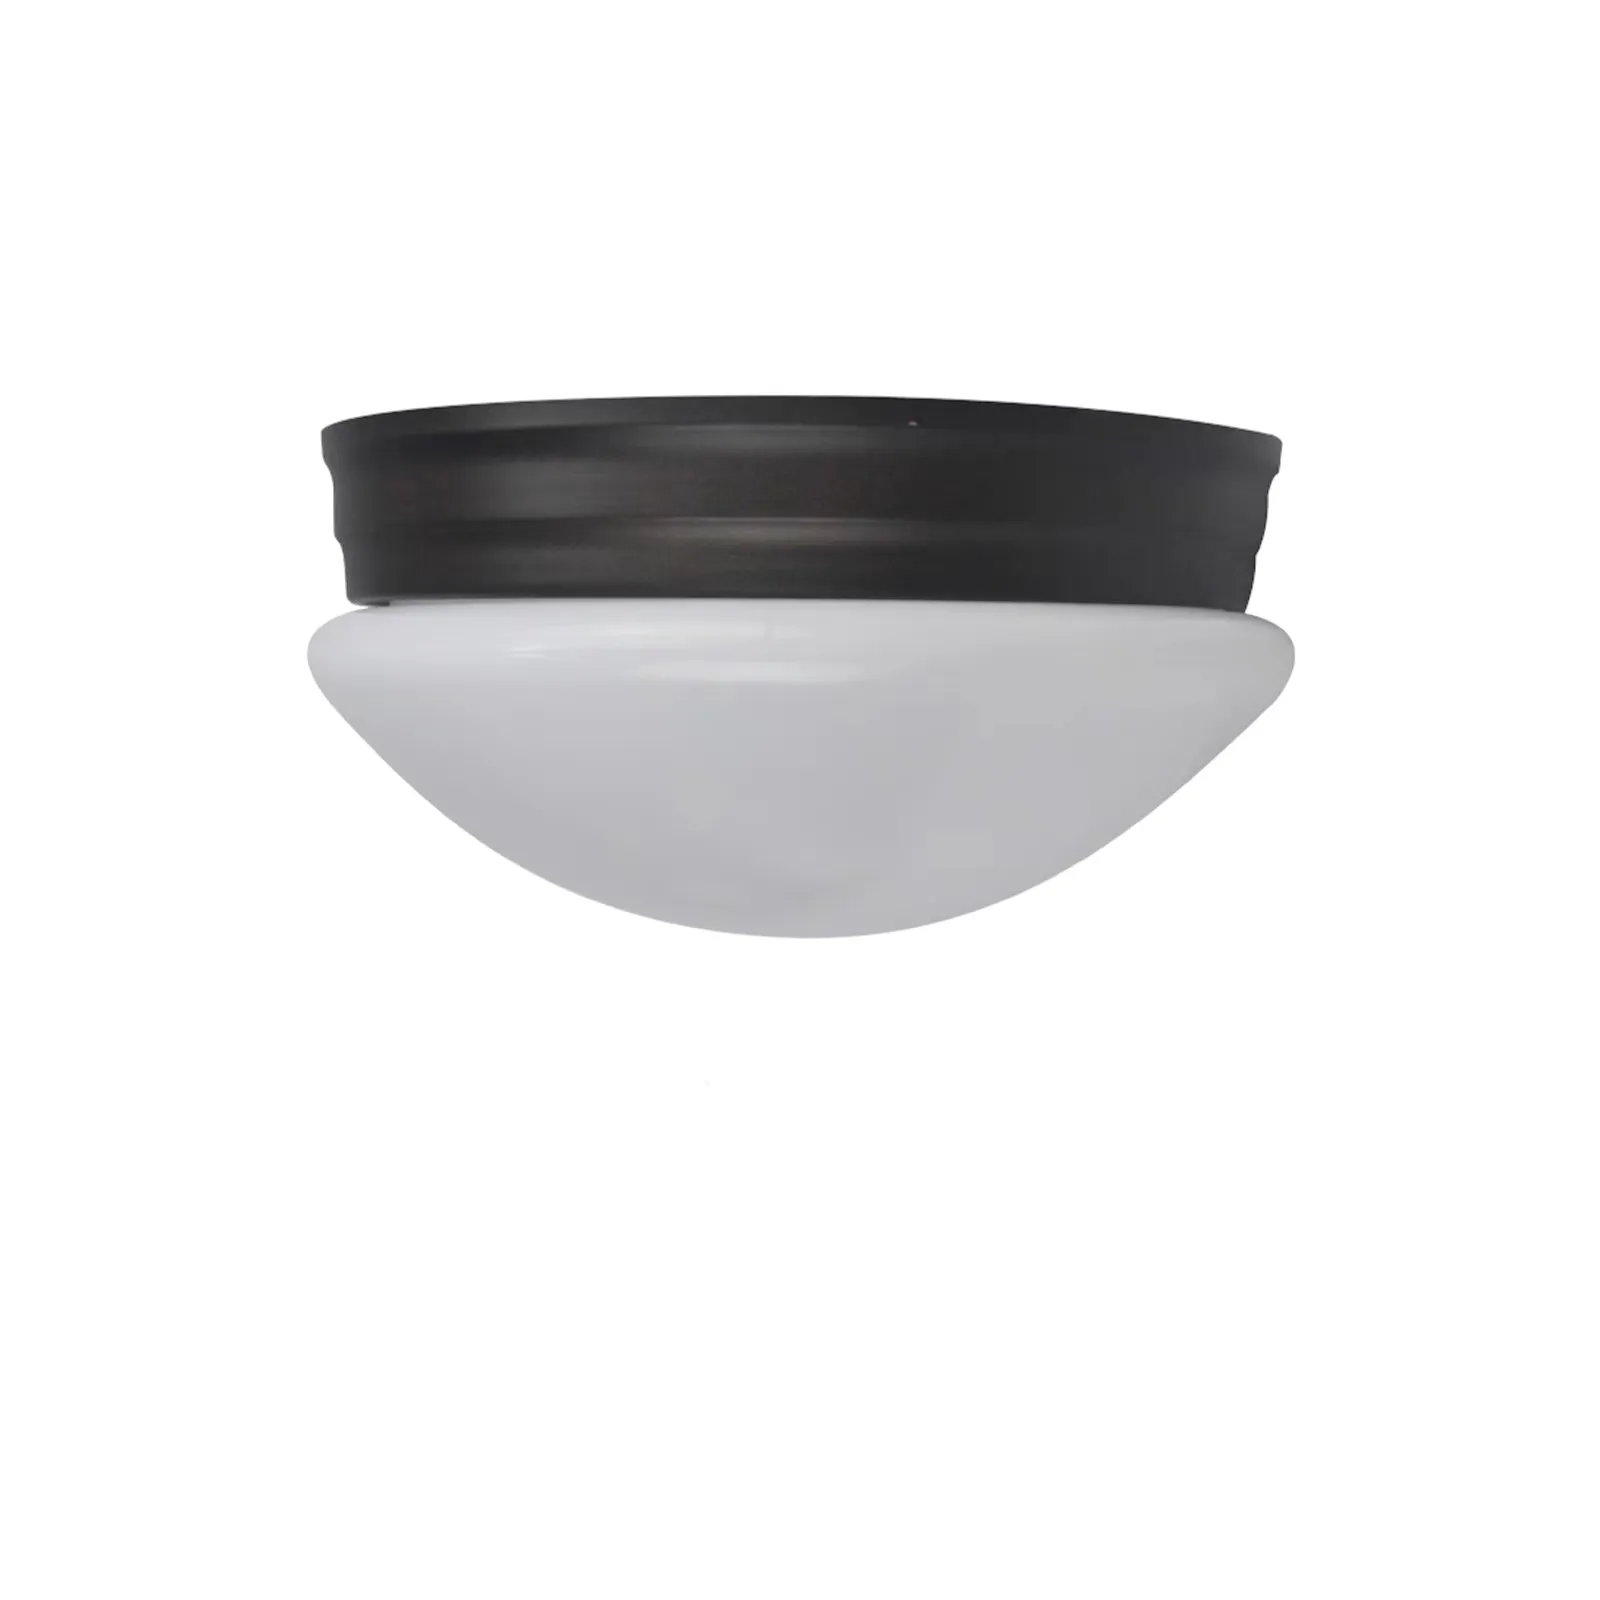 Driver on board solution 9inch 15w single CCT Mushroom led wall light home office hotel decoration